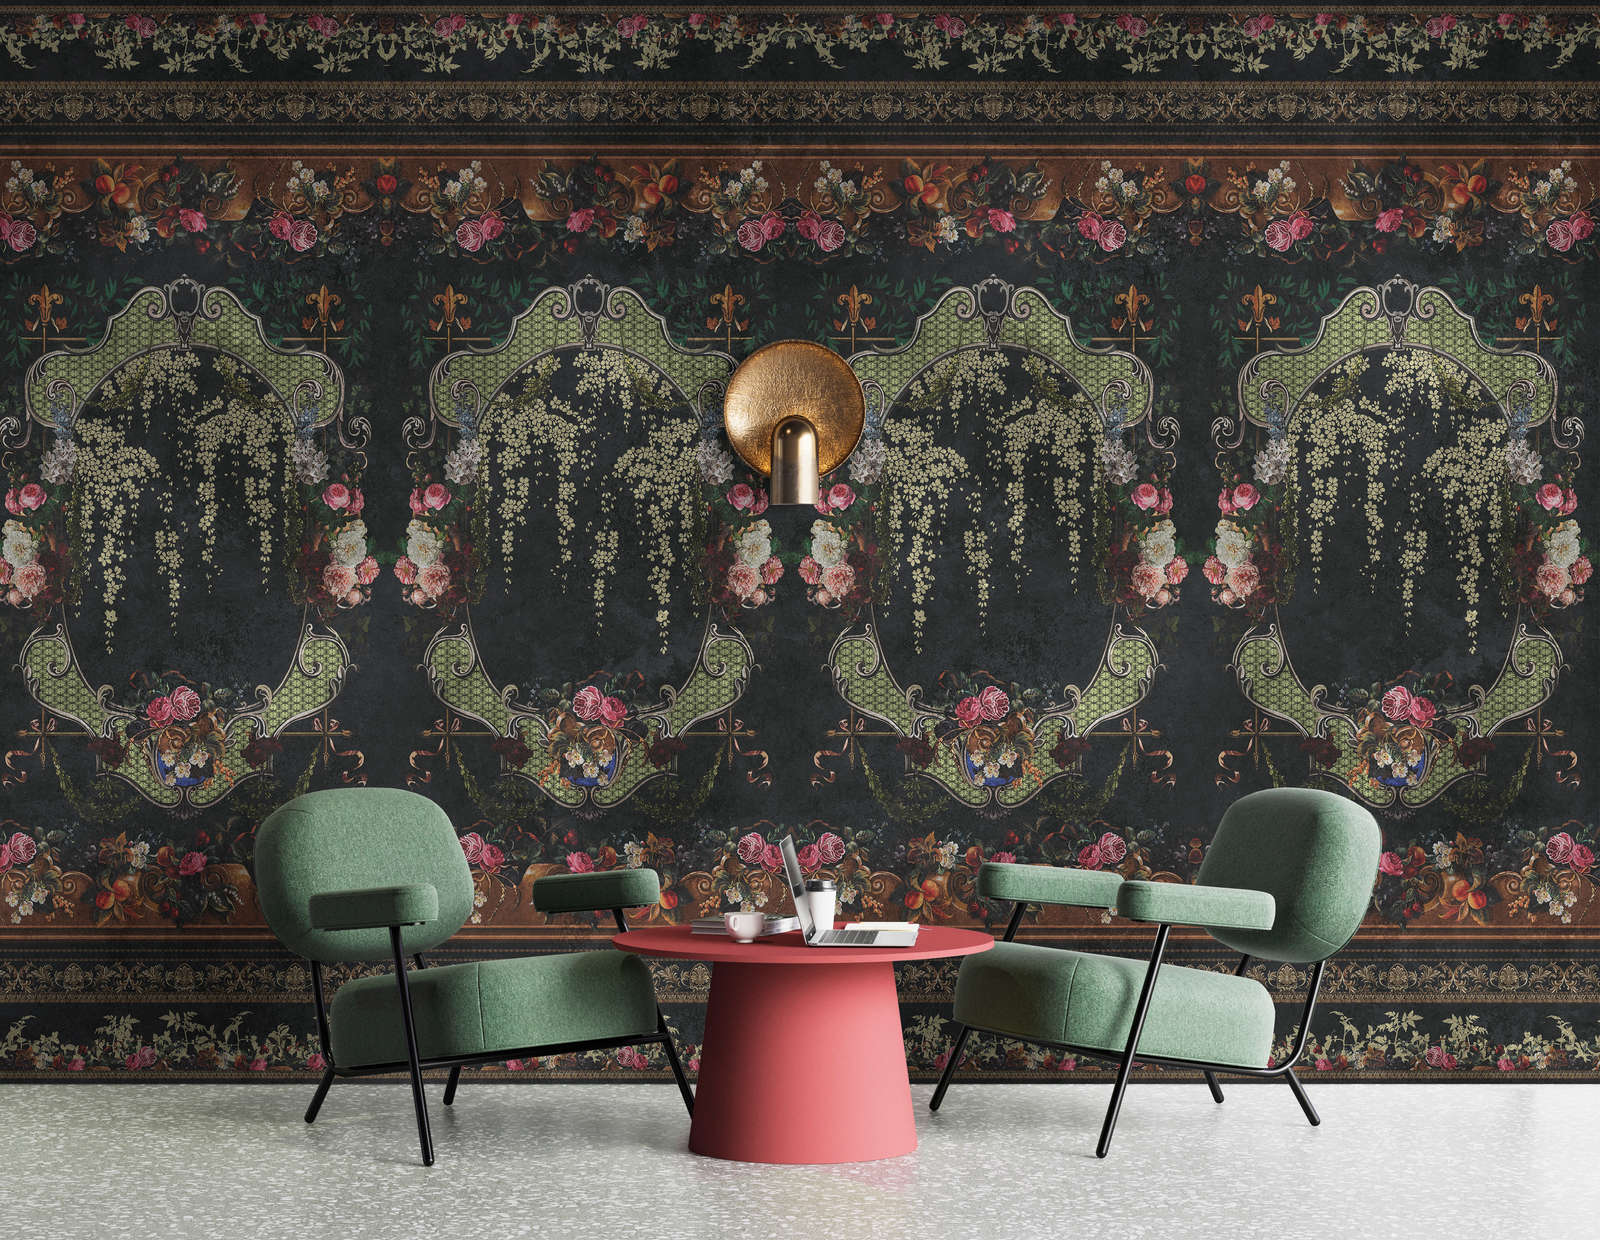             Photo wallpaper »babette« - Ornamental panelling with floral design on vintage plaster texture - red, dark blue | Light textured non-woven
        